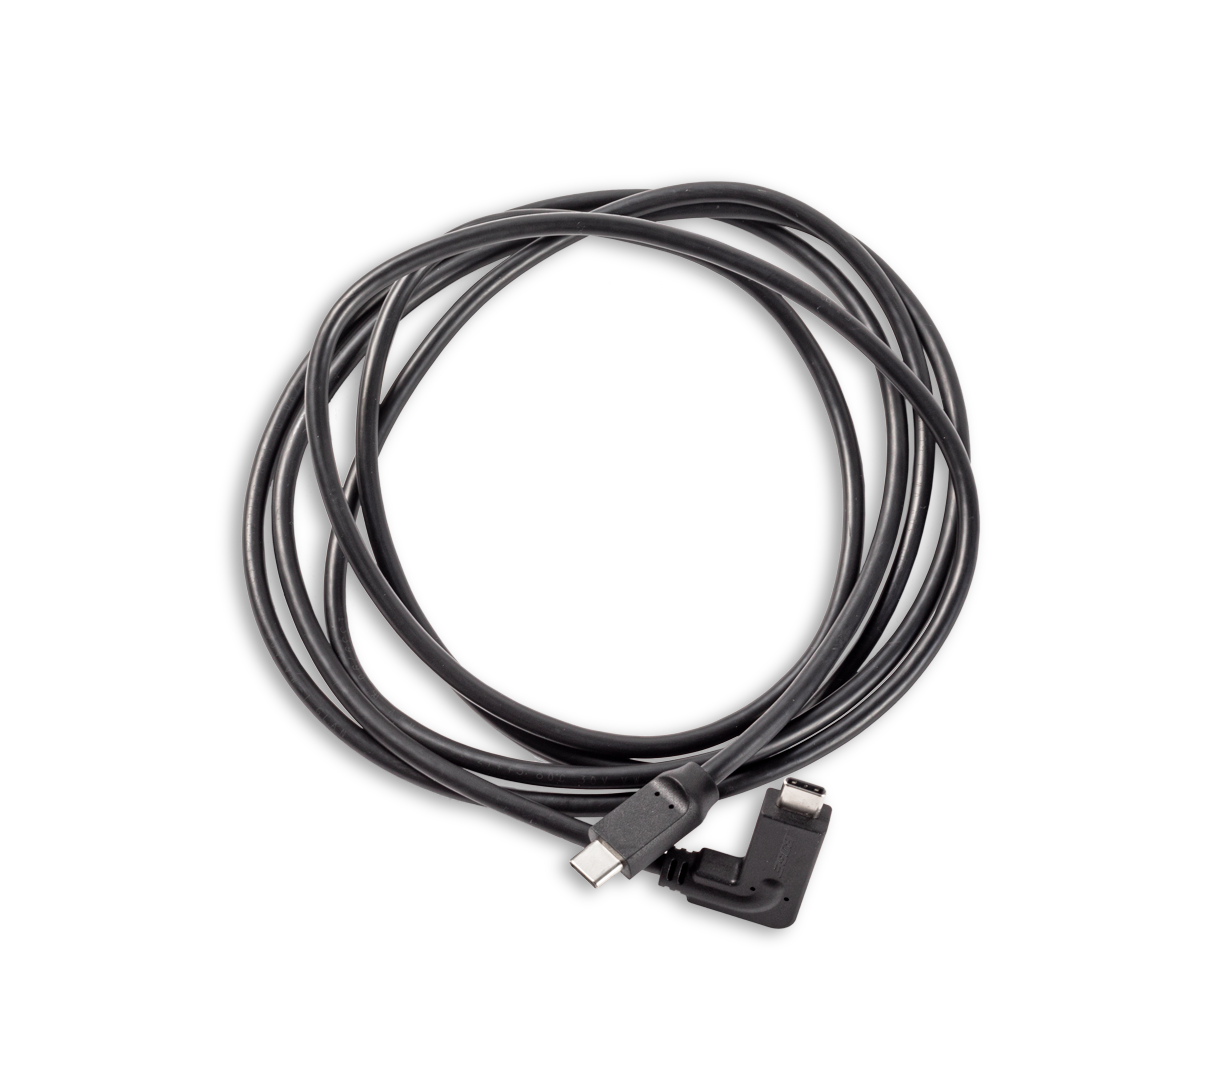 Bose USB 3.1 cable, 2 m